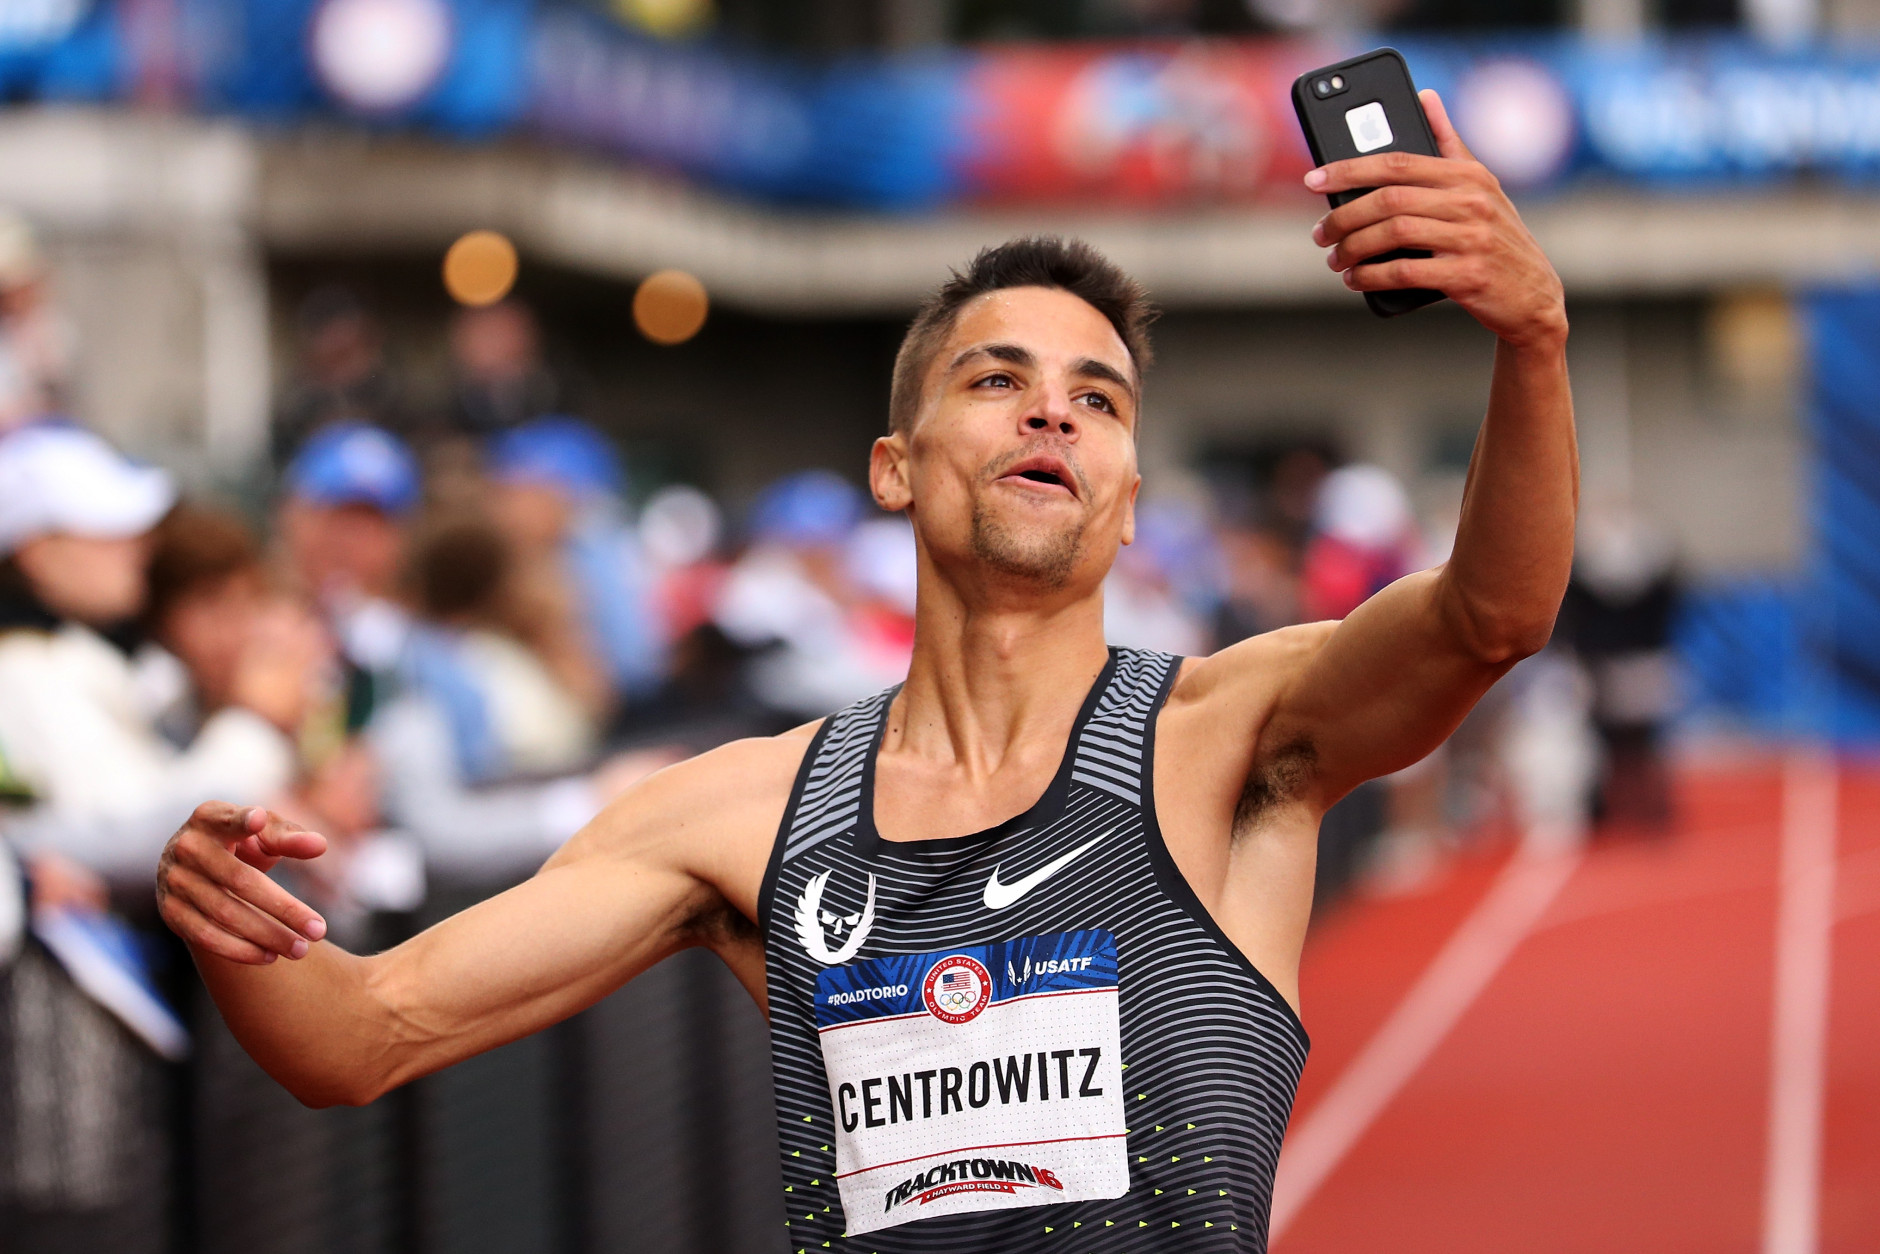 EUGENE, OR - JULY 10:  Matthew Centrowitz celebrates after placing first in the Men's 1500 Meter Final during the 2016 U.S. Olympic Track &amp; Field Team Trials at Hayward Field on July 10, 2016 in Eugene, Oregon.  (Photo by Andy Lyons/Getty Images)